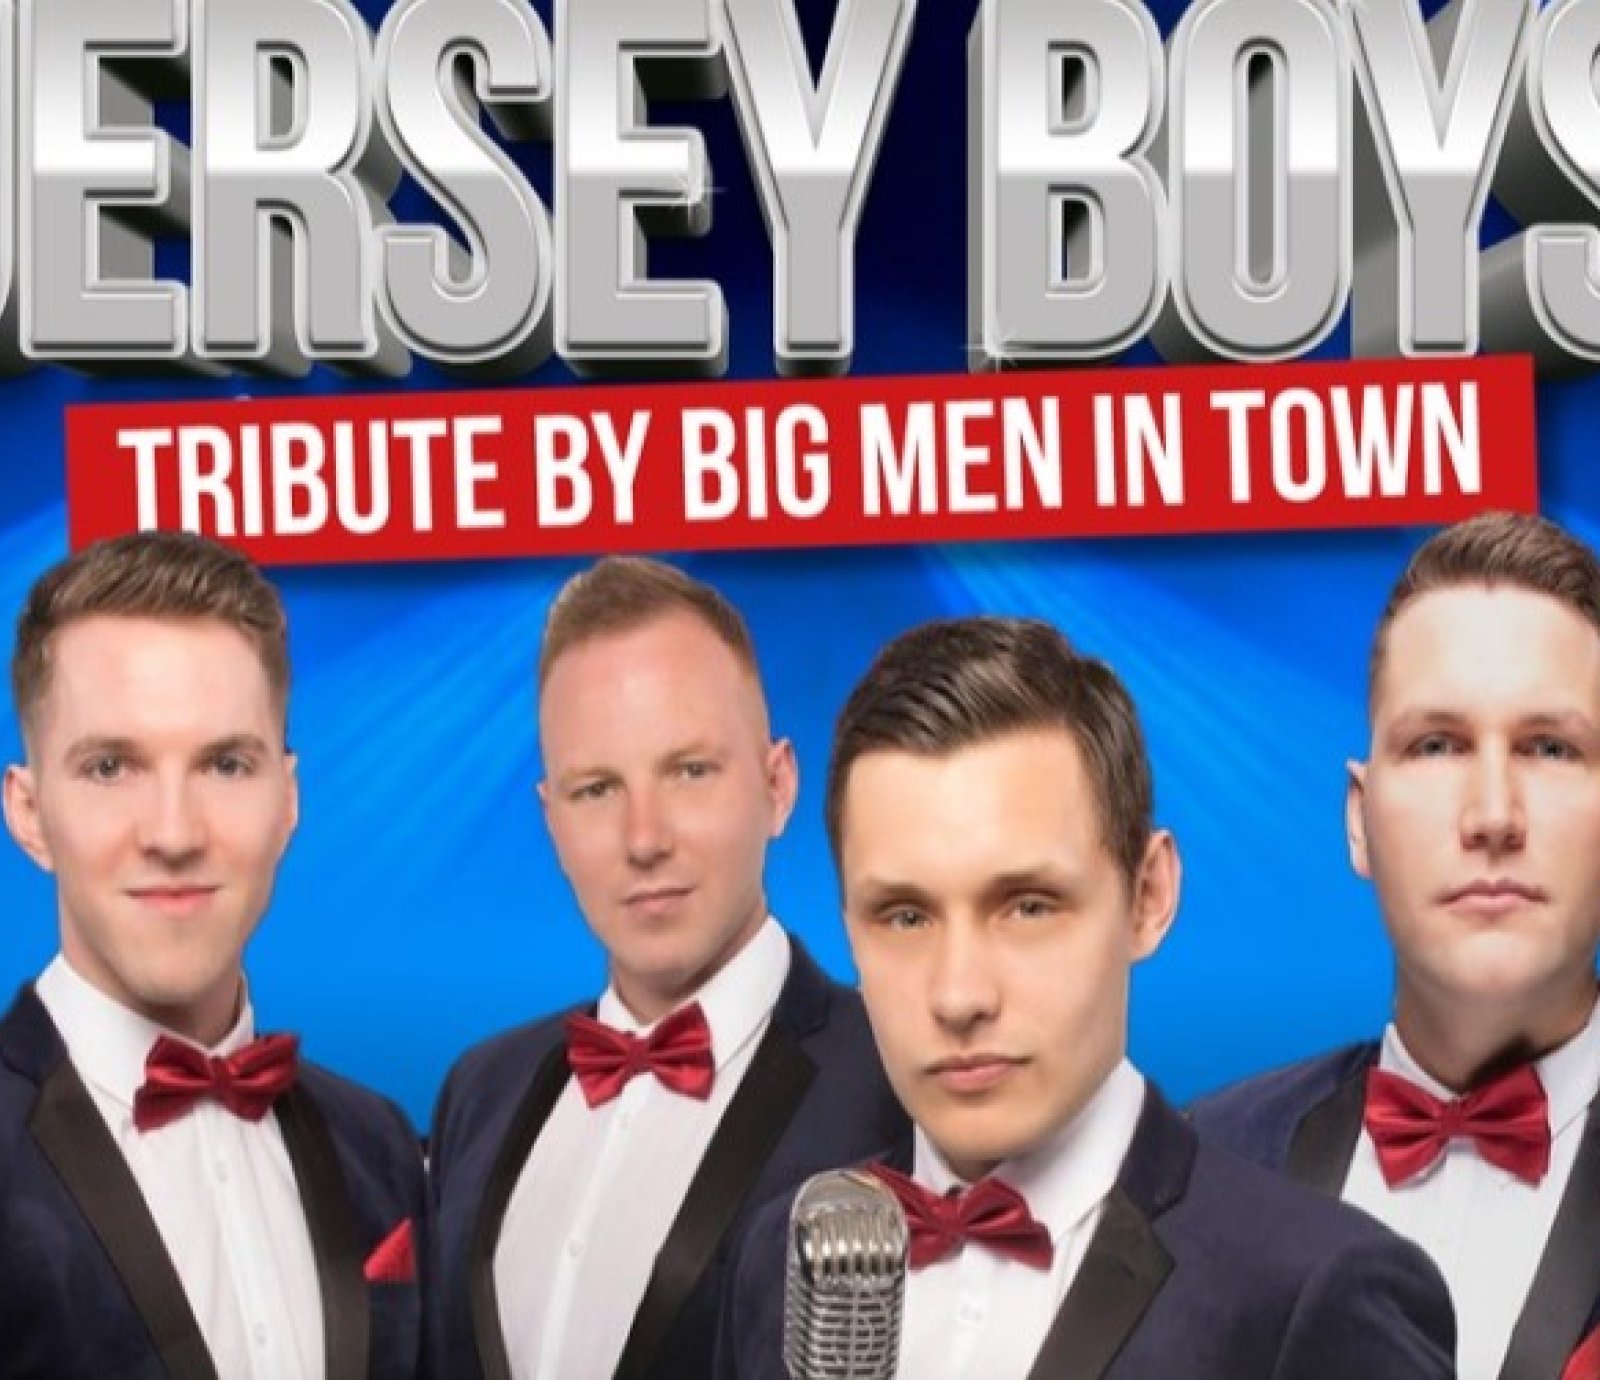 The Jersey Boys - Tribute by Big Men in Town